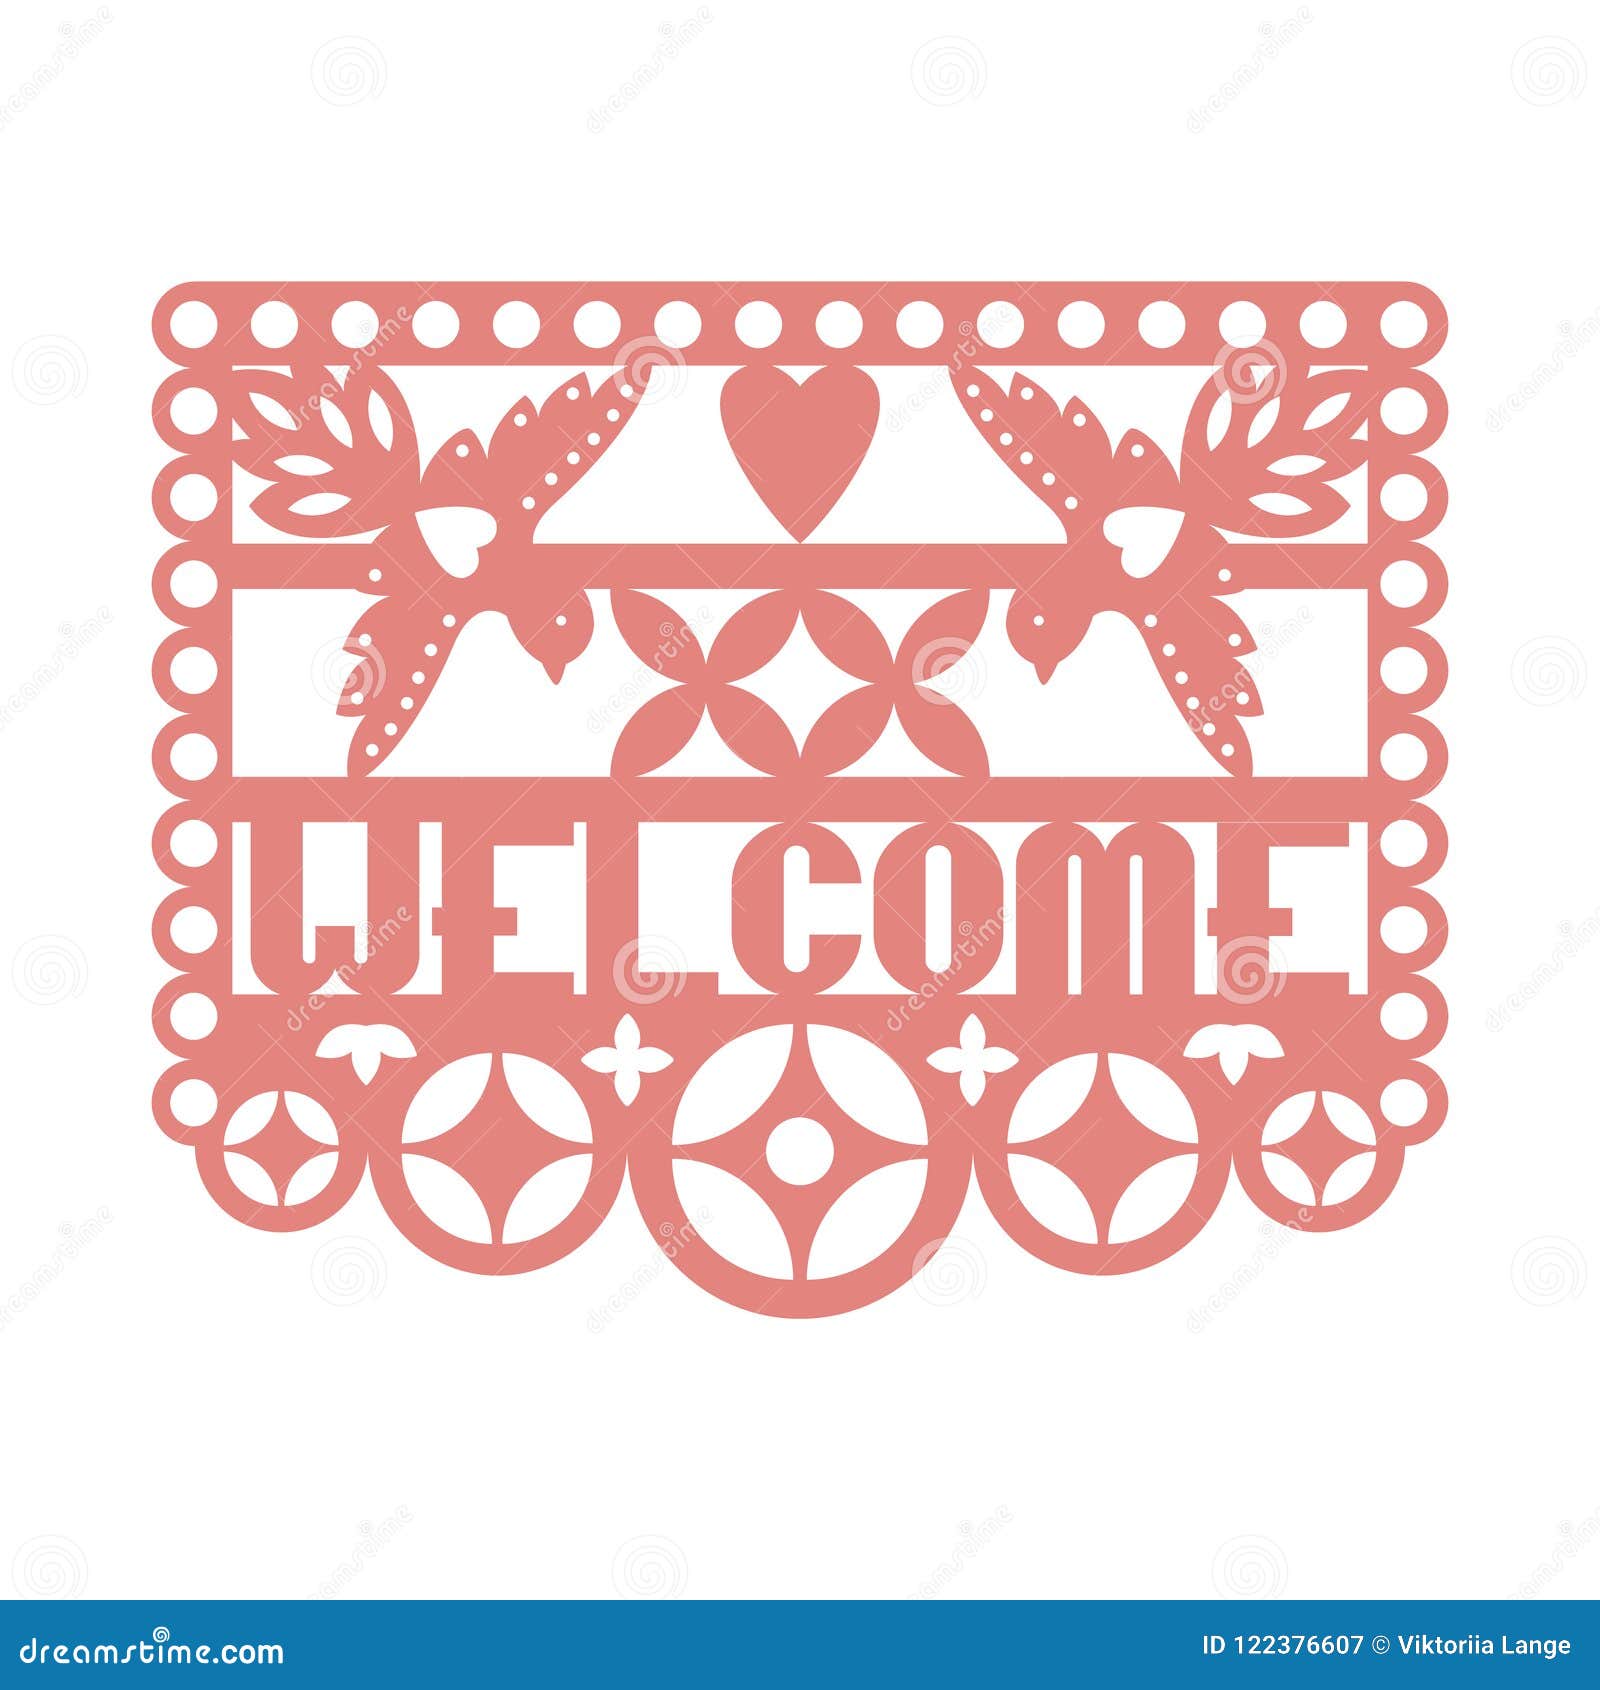 paper greeting card with cut out flowers, doves and text welcome. papel picado.